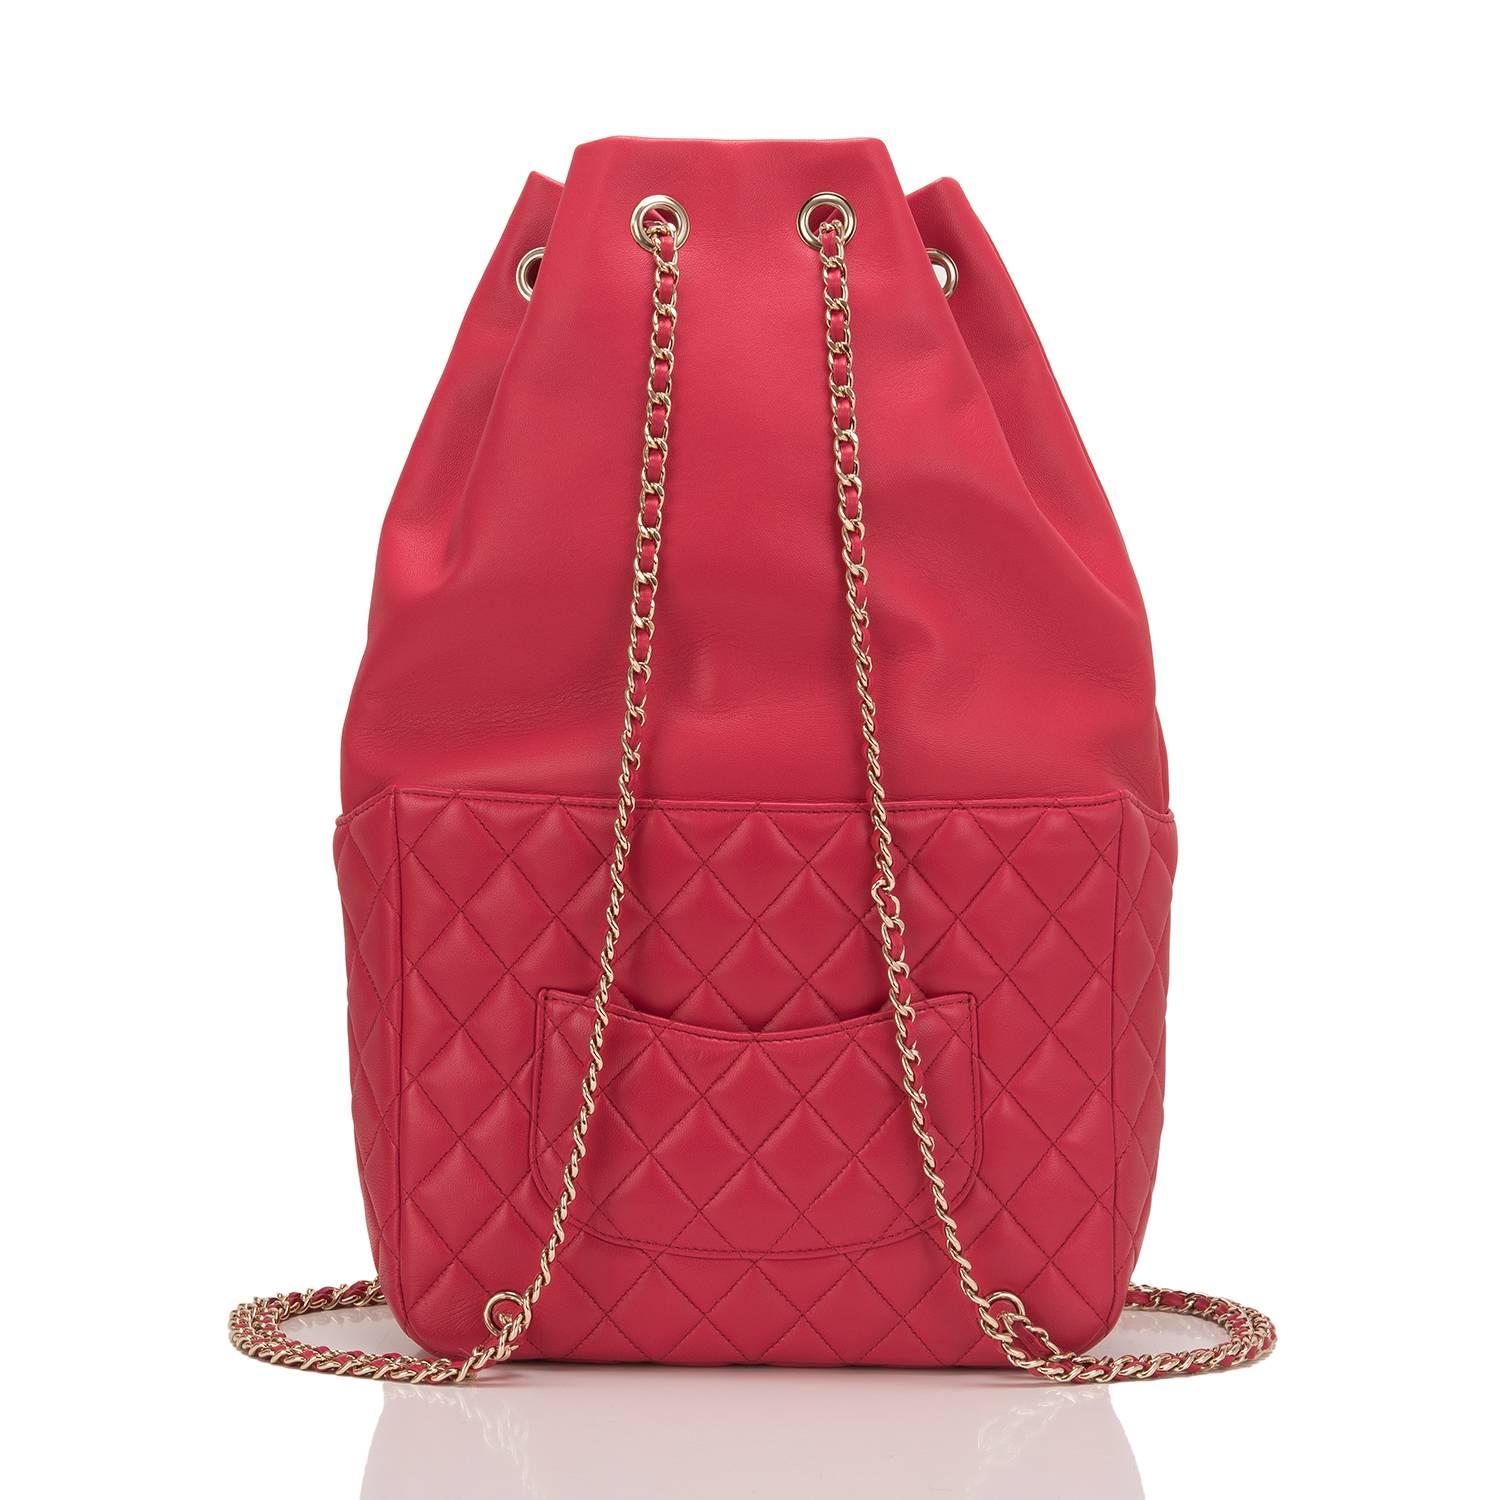 Chanel Red Lambskin Large Backpack In New Condition For Sale In New York, NY